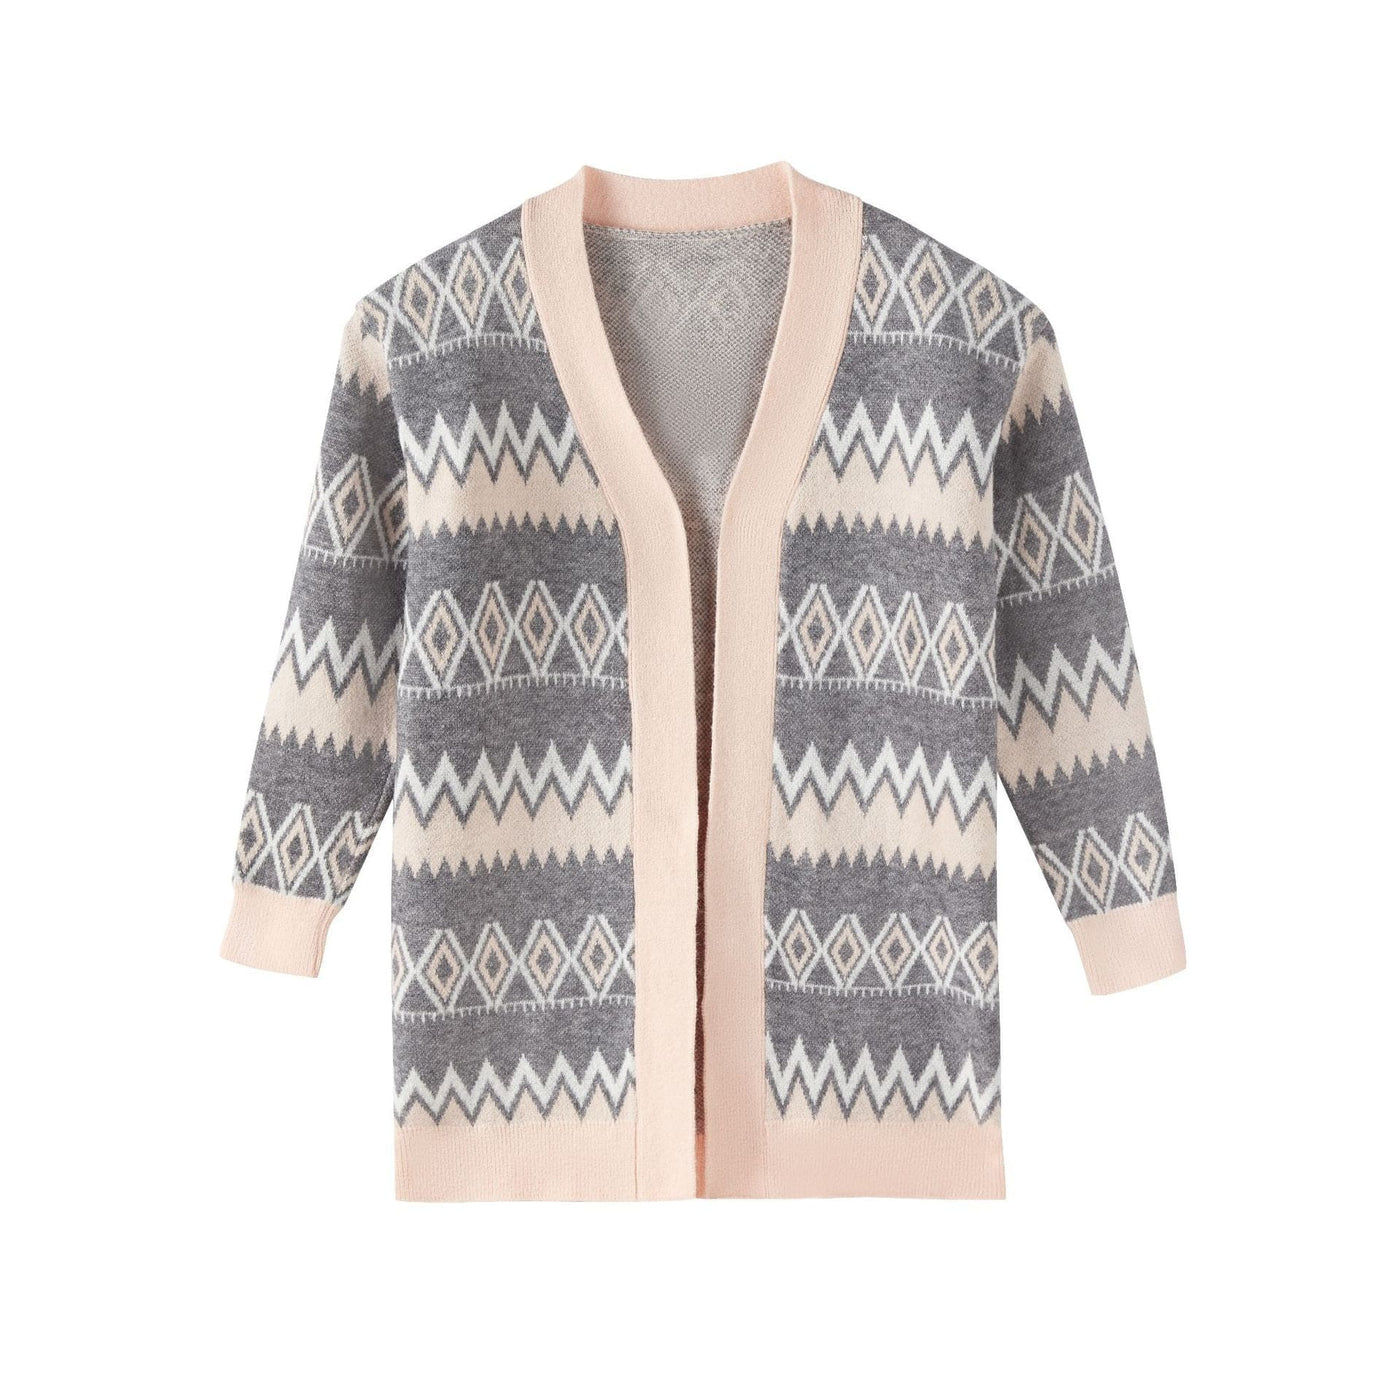 Owen S / Gray and pink Claire Geometric Print Cardigan